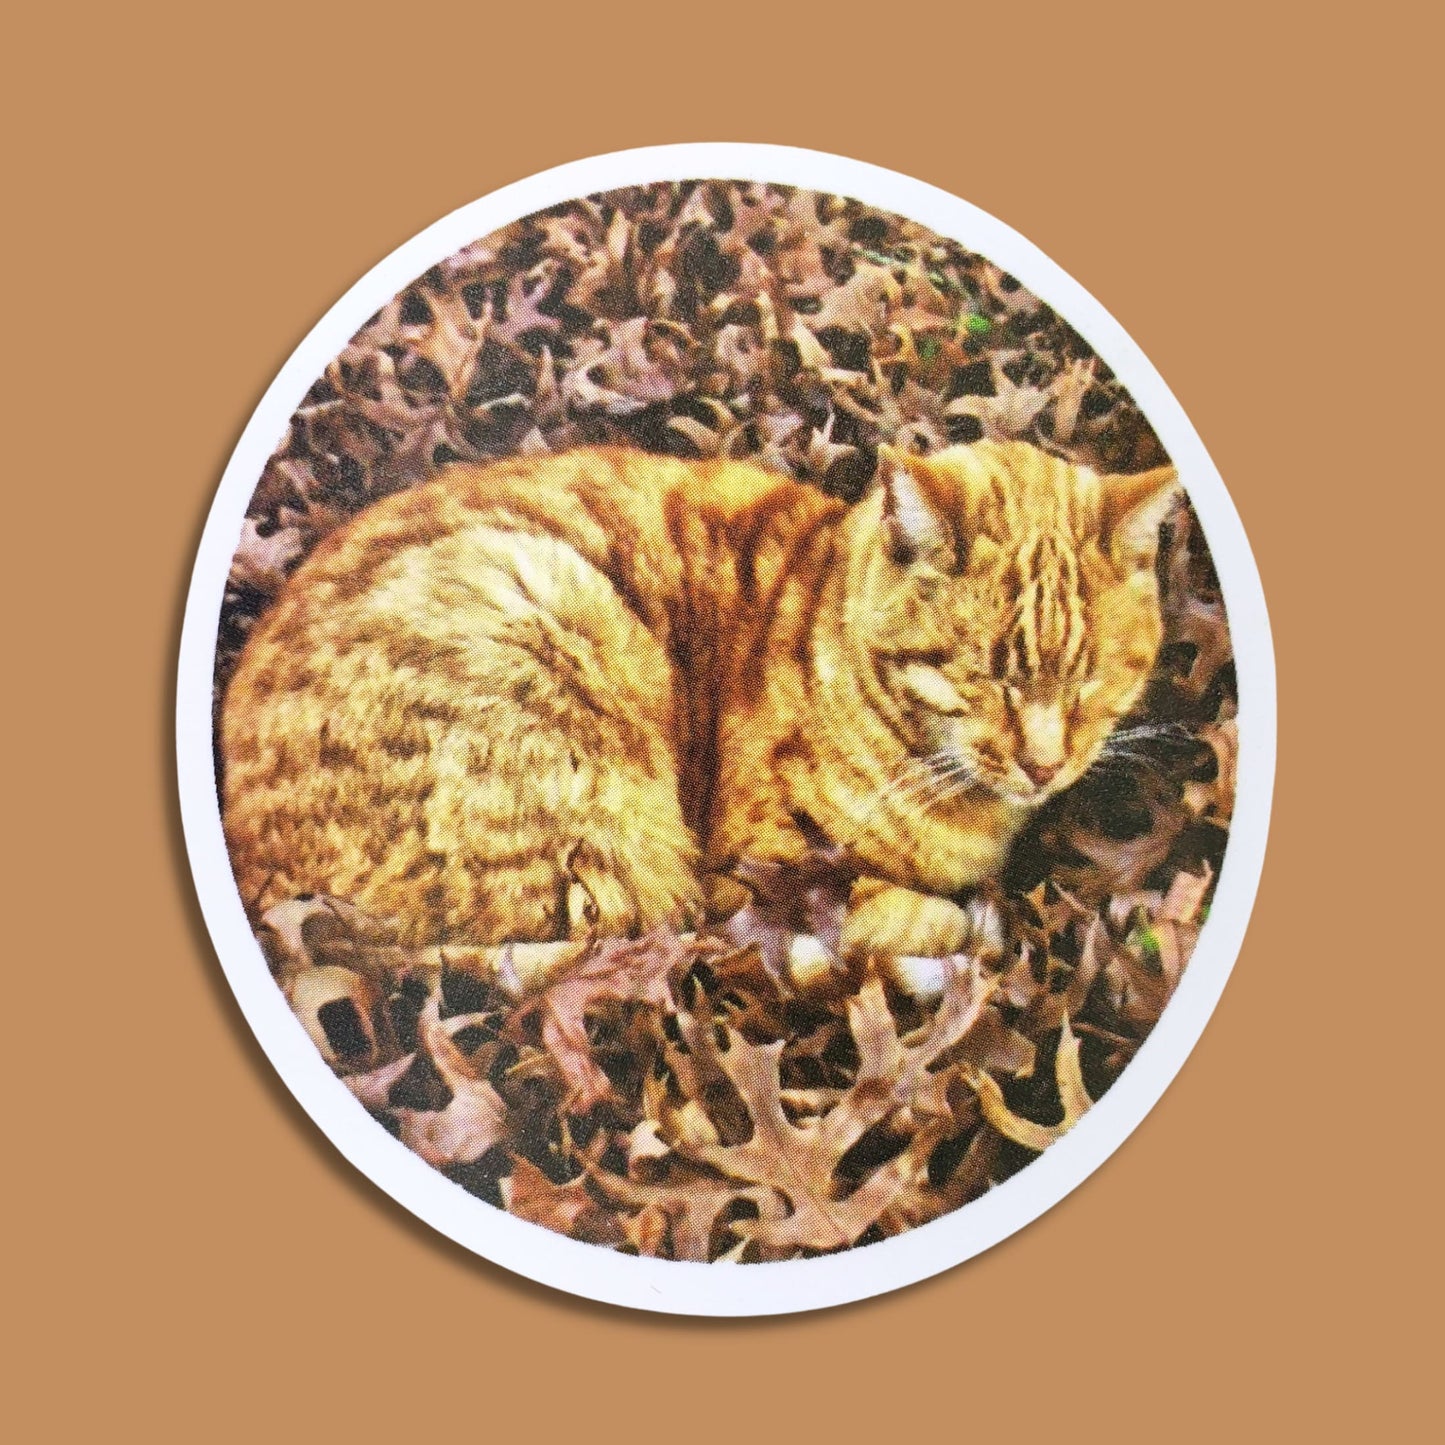 Orange Tabby Cat on Leaves Waterproof Sticker | Autumn Cat from Confetti Kitty, Only 1.00